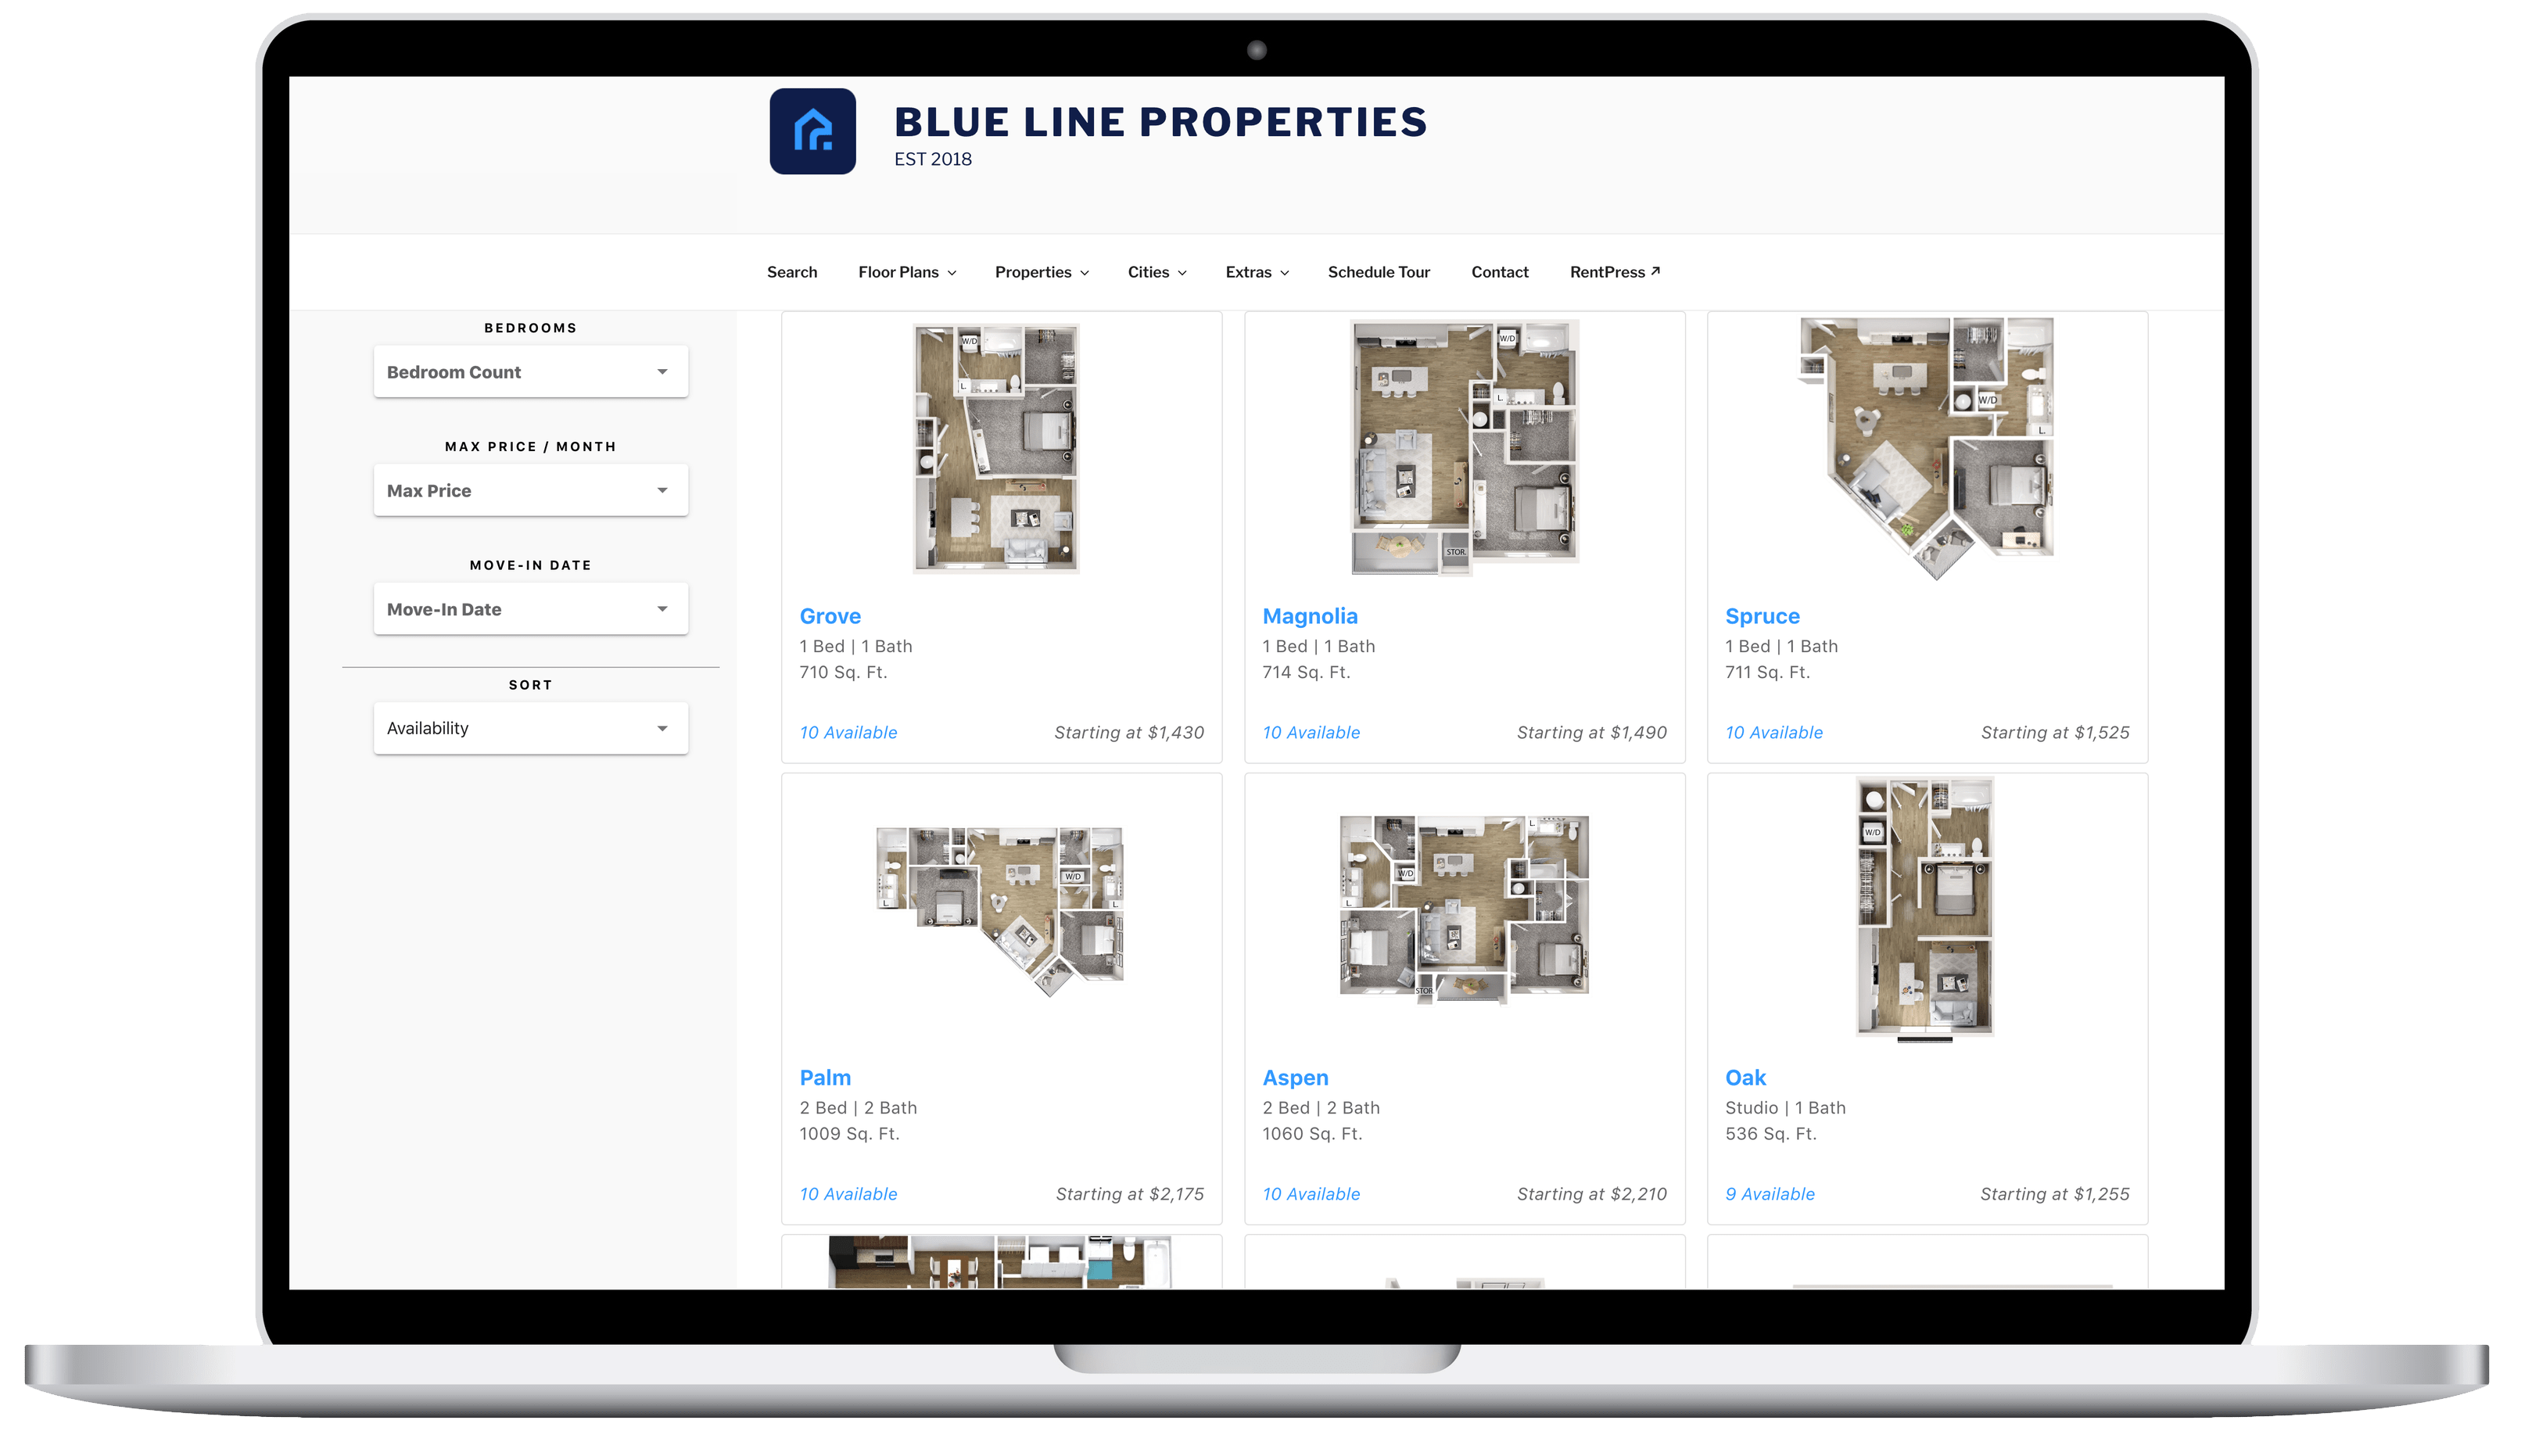 Shoppers can filter and sort through a grid of floor plans.